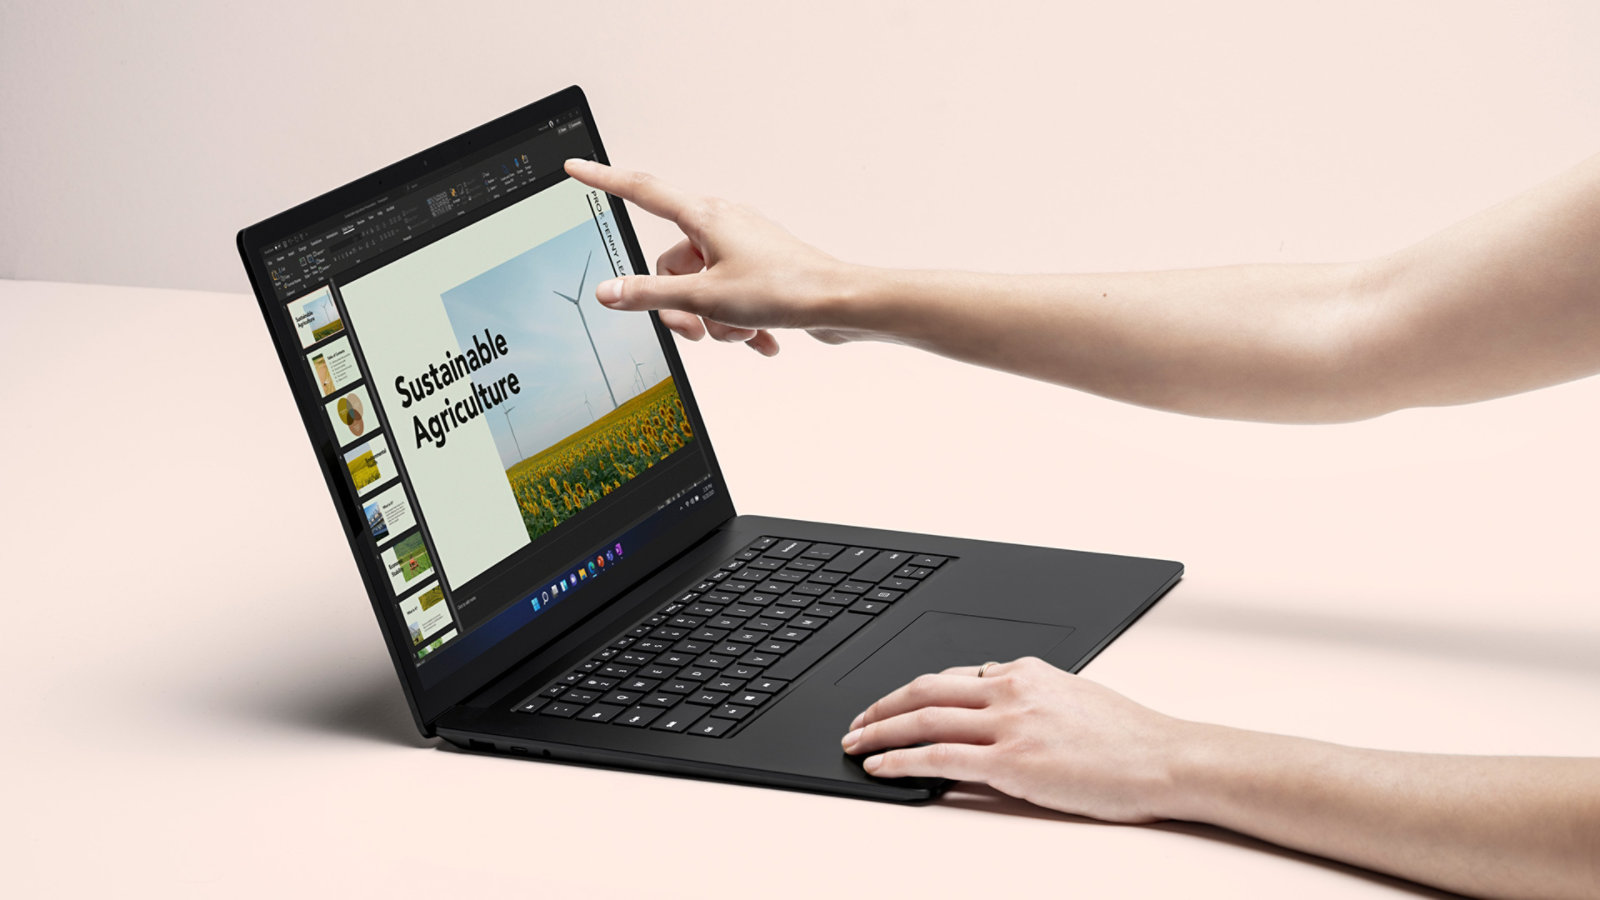 A person’s hands are shown interacting with the touchscreen on Surface Laptop 4